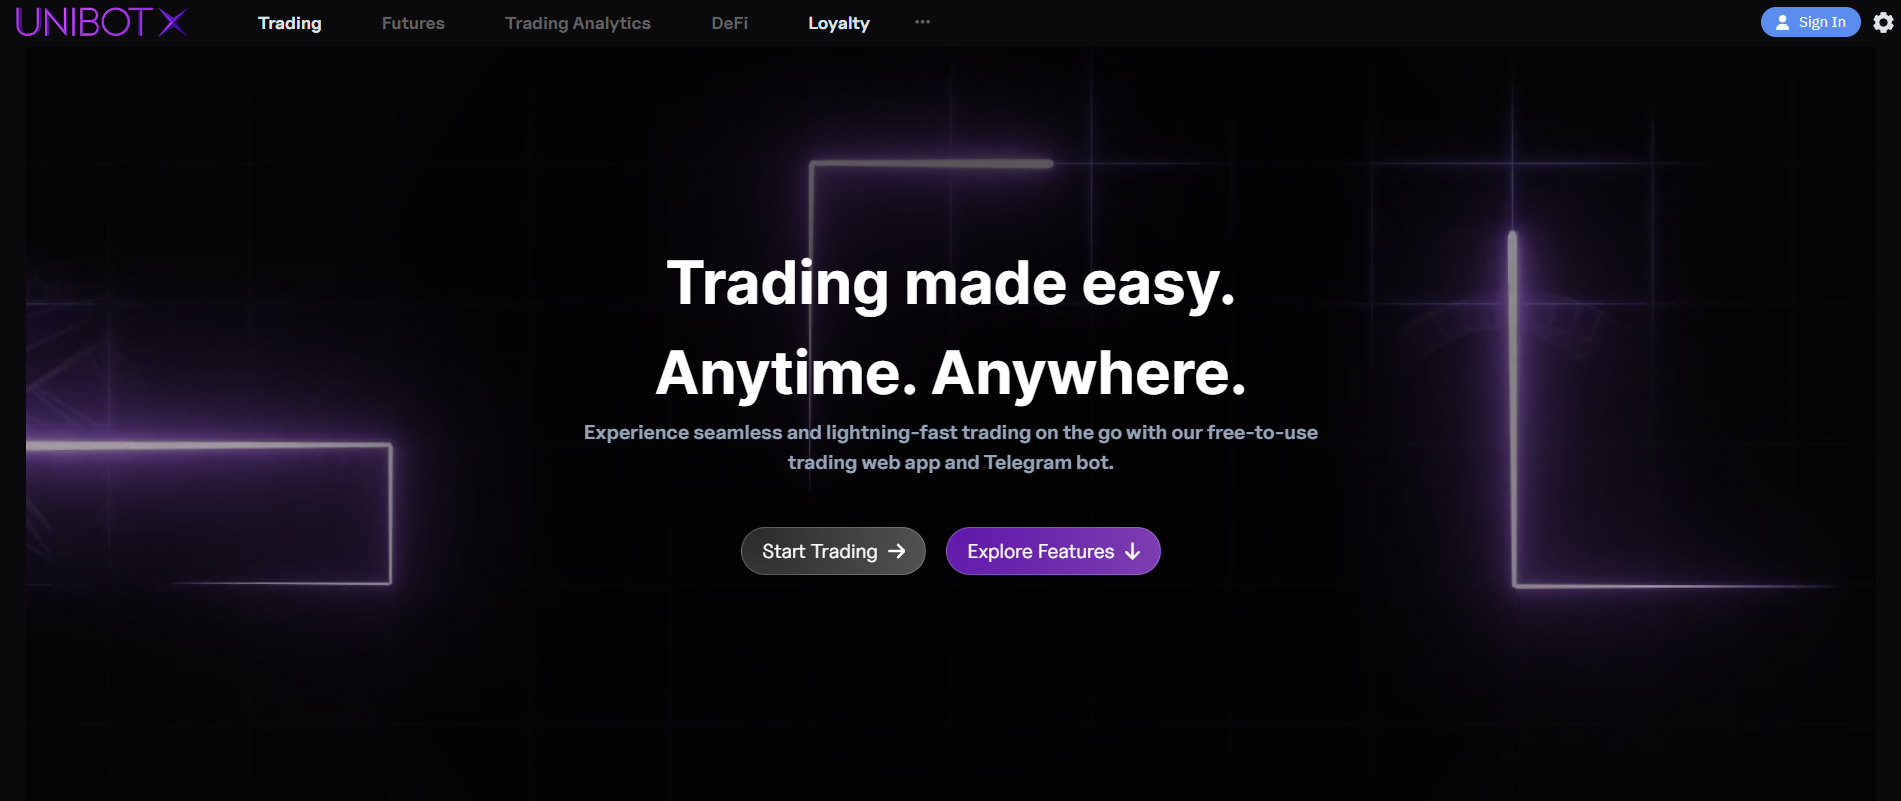 UNIBOT: The Revolution in Cryptocurrency Trading Through Telegram - news